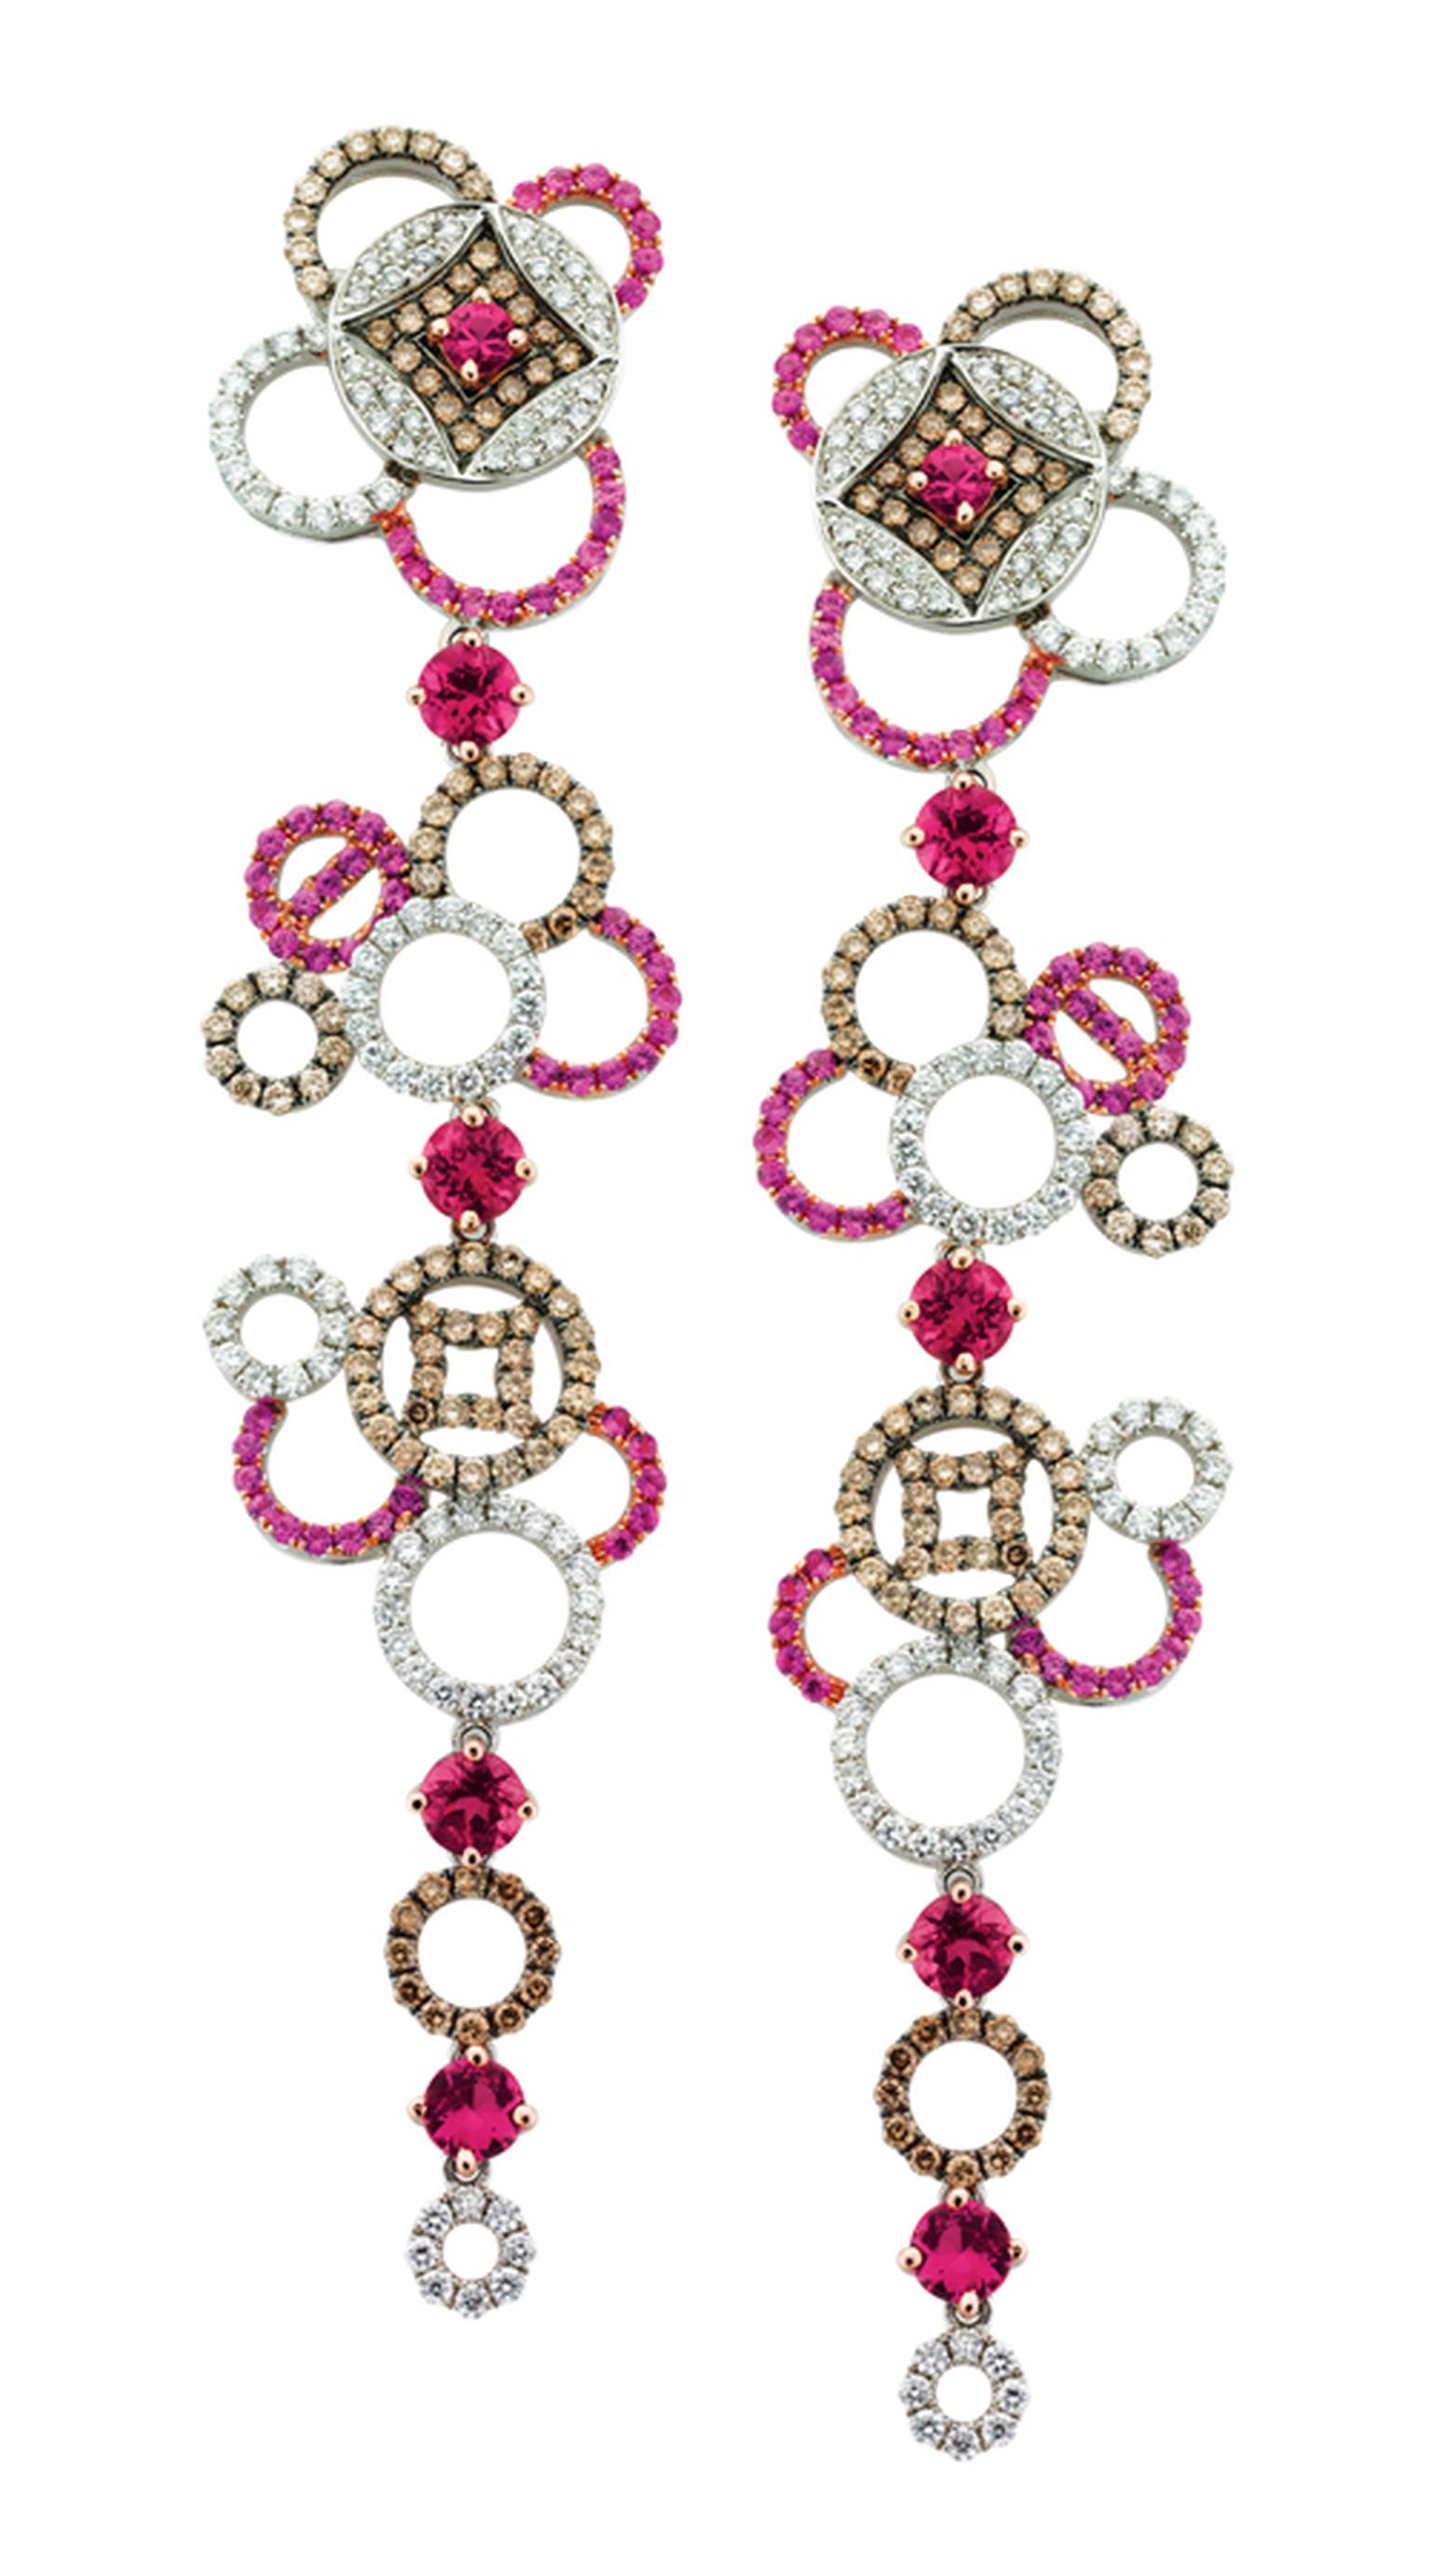 SHO Fine Jewellery Coin Drop SHO Fine Jewellery Coin Drop Earrings in 18ct White Gold with Pink Sapphires Tourmaline and White and Cognac Diamonds. £9840 in 18ct White Gold with Pink Sapphires Tourmaline and White and Cognac Diamonds. POA